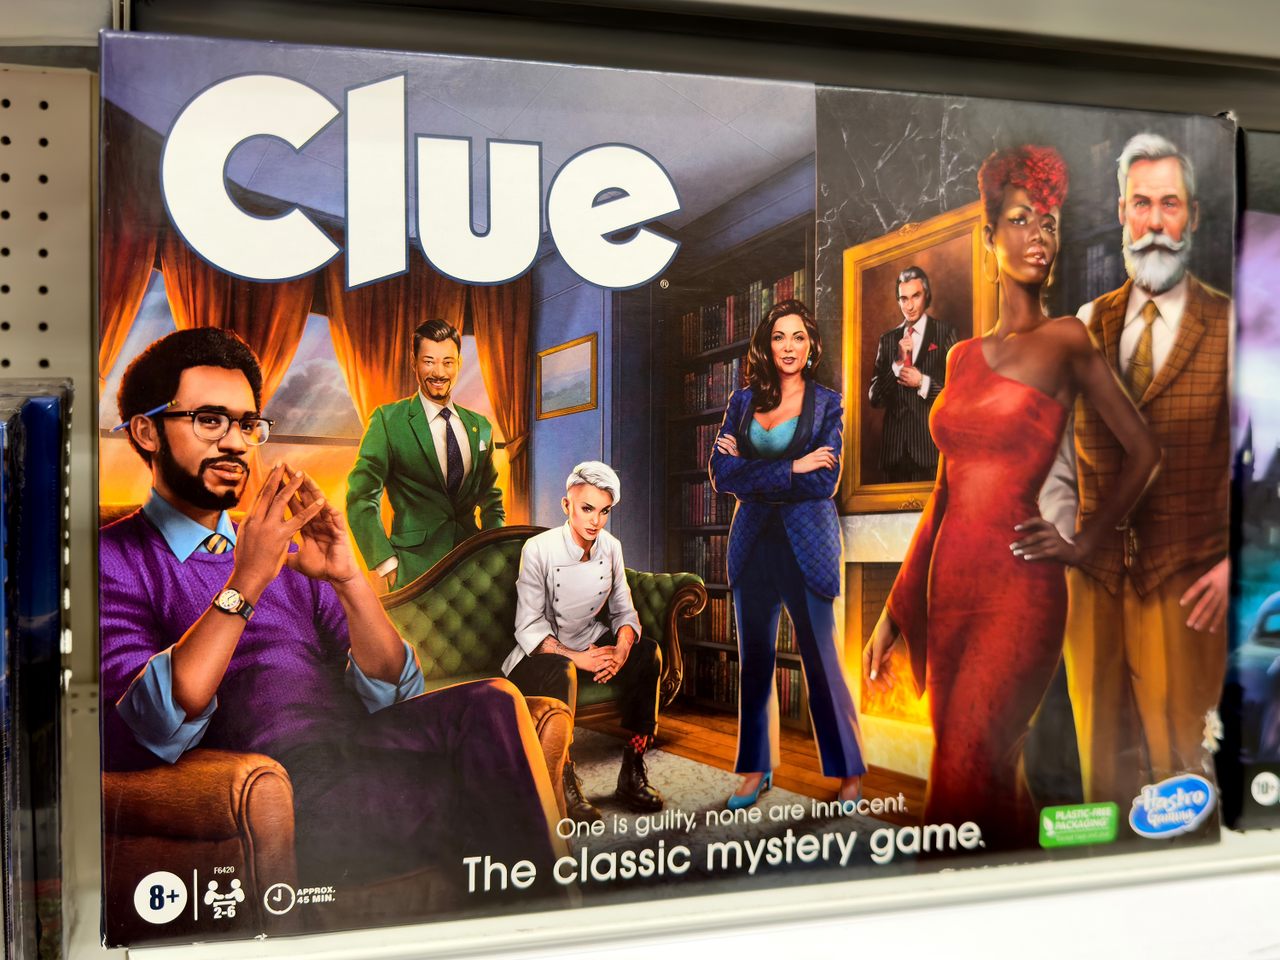 The latest version of clue includes a more diverse cast that some observers have noted codes as queer. 